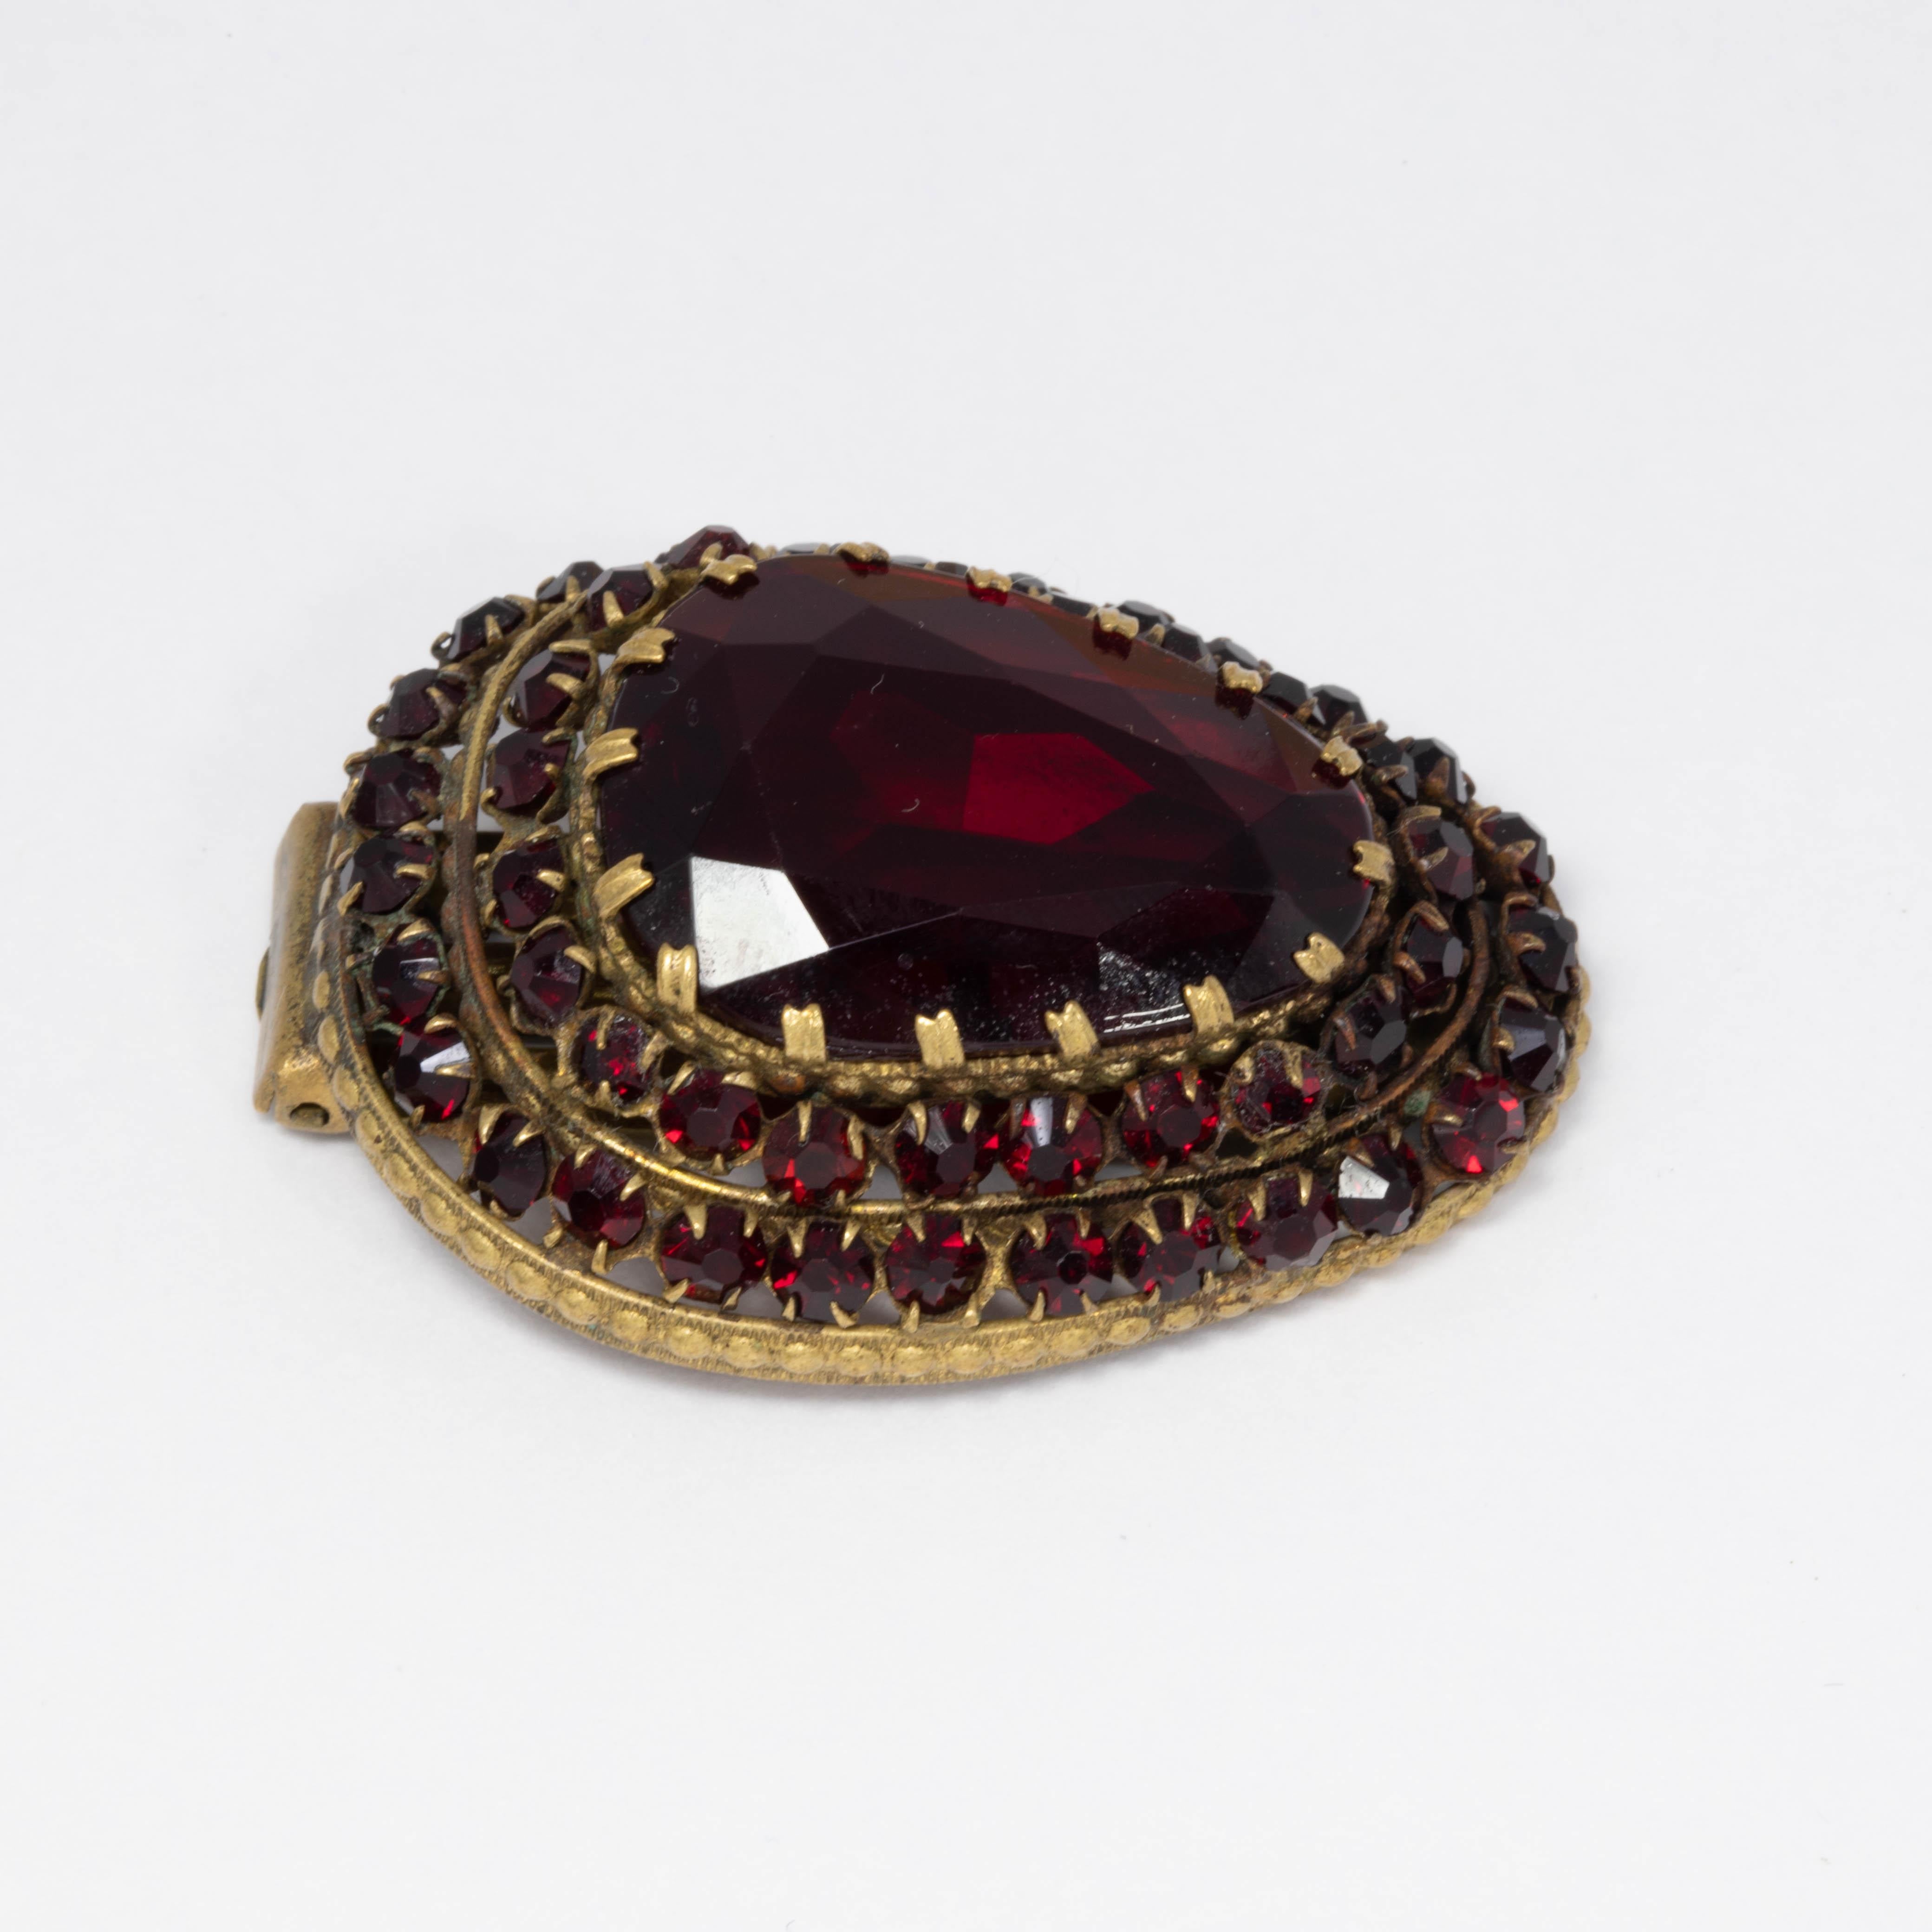 An extravagant Czechoslovakian clip, featuring a bold red centerpiece crystal accented with two rows of smaller jewels. Antique brass tone.

Signed Czechoslovakia